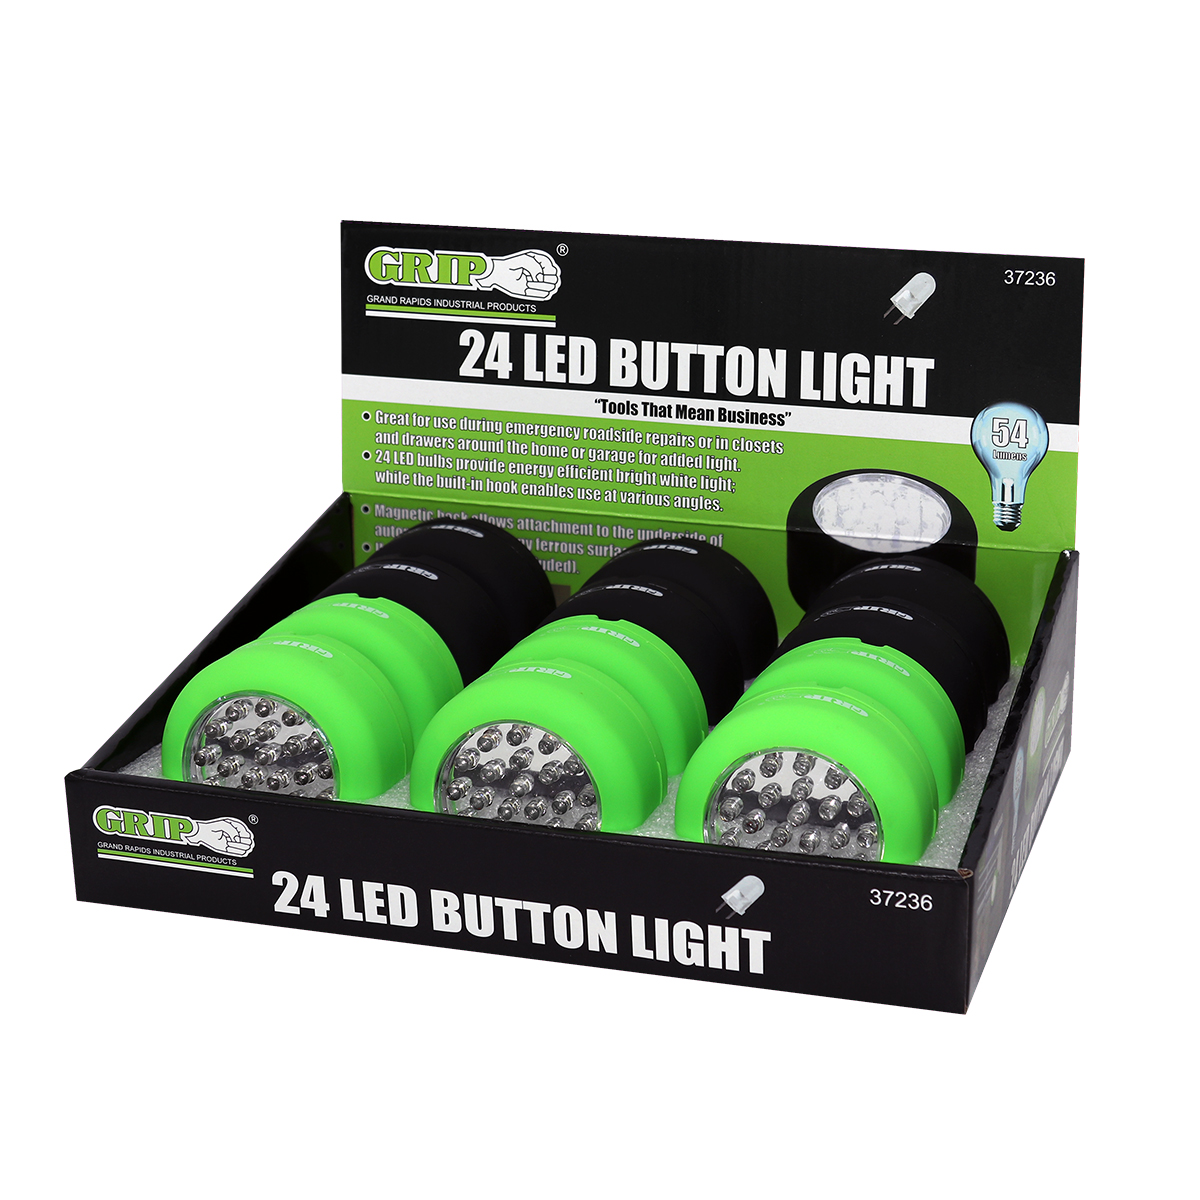 24 LED Bulbs Grip on Tools 37236 Button Worklight 